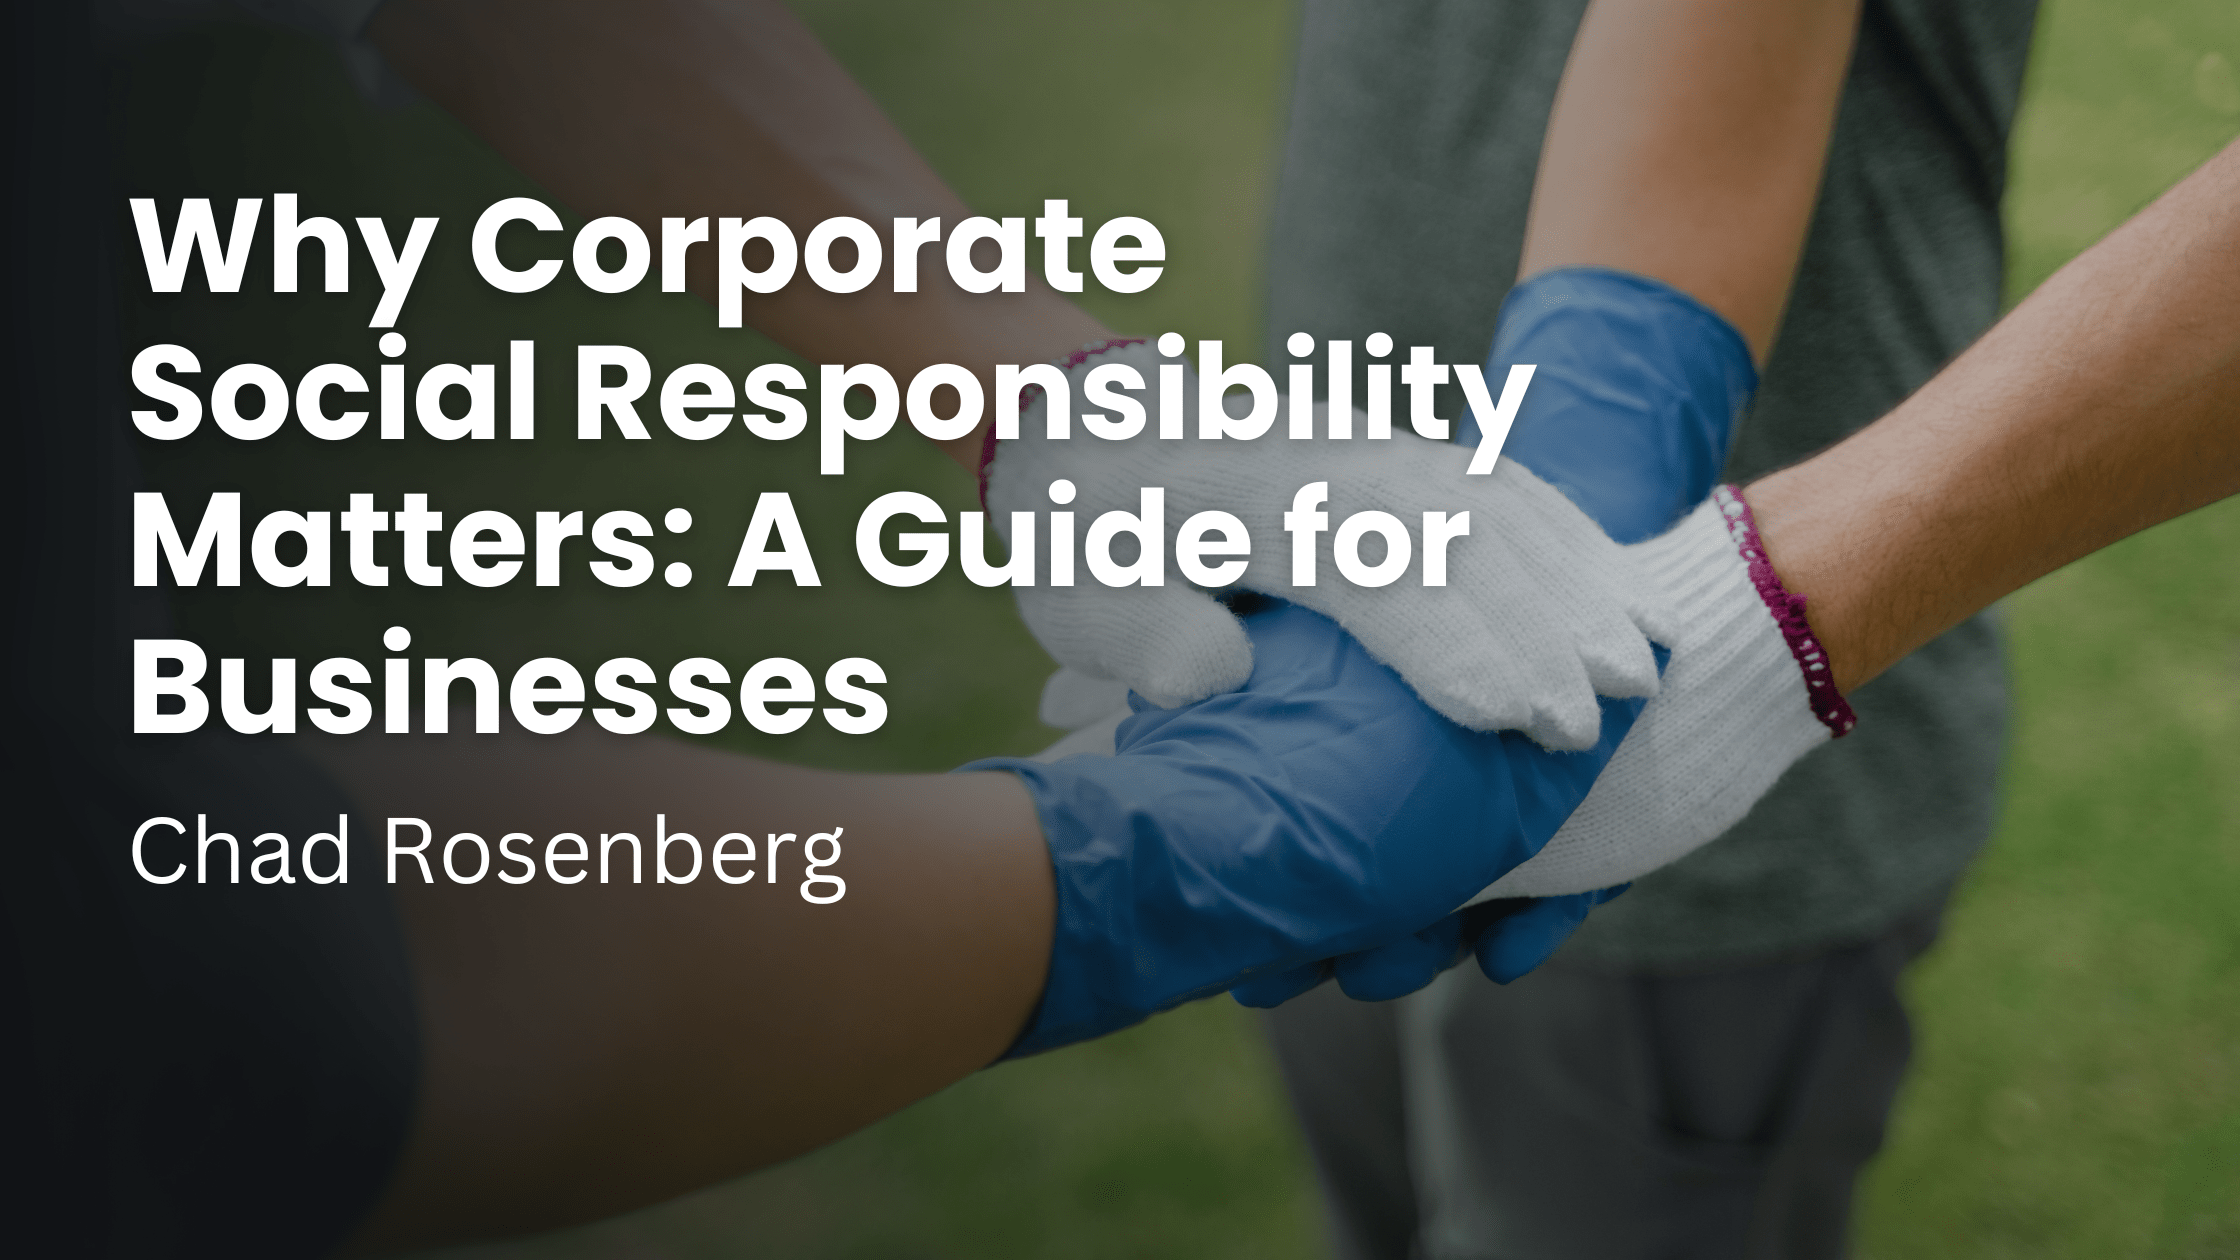 Why Corporate Social Responsibility Matters: A Guide for Businesses